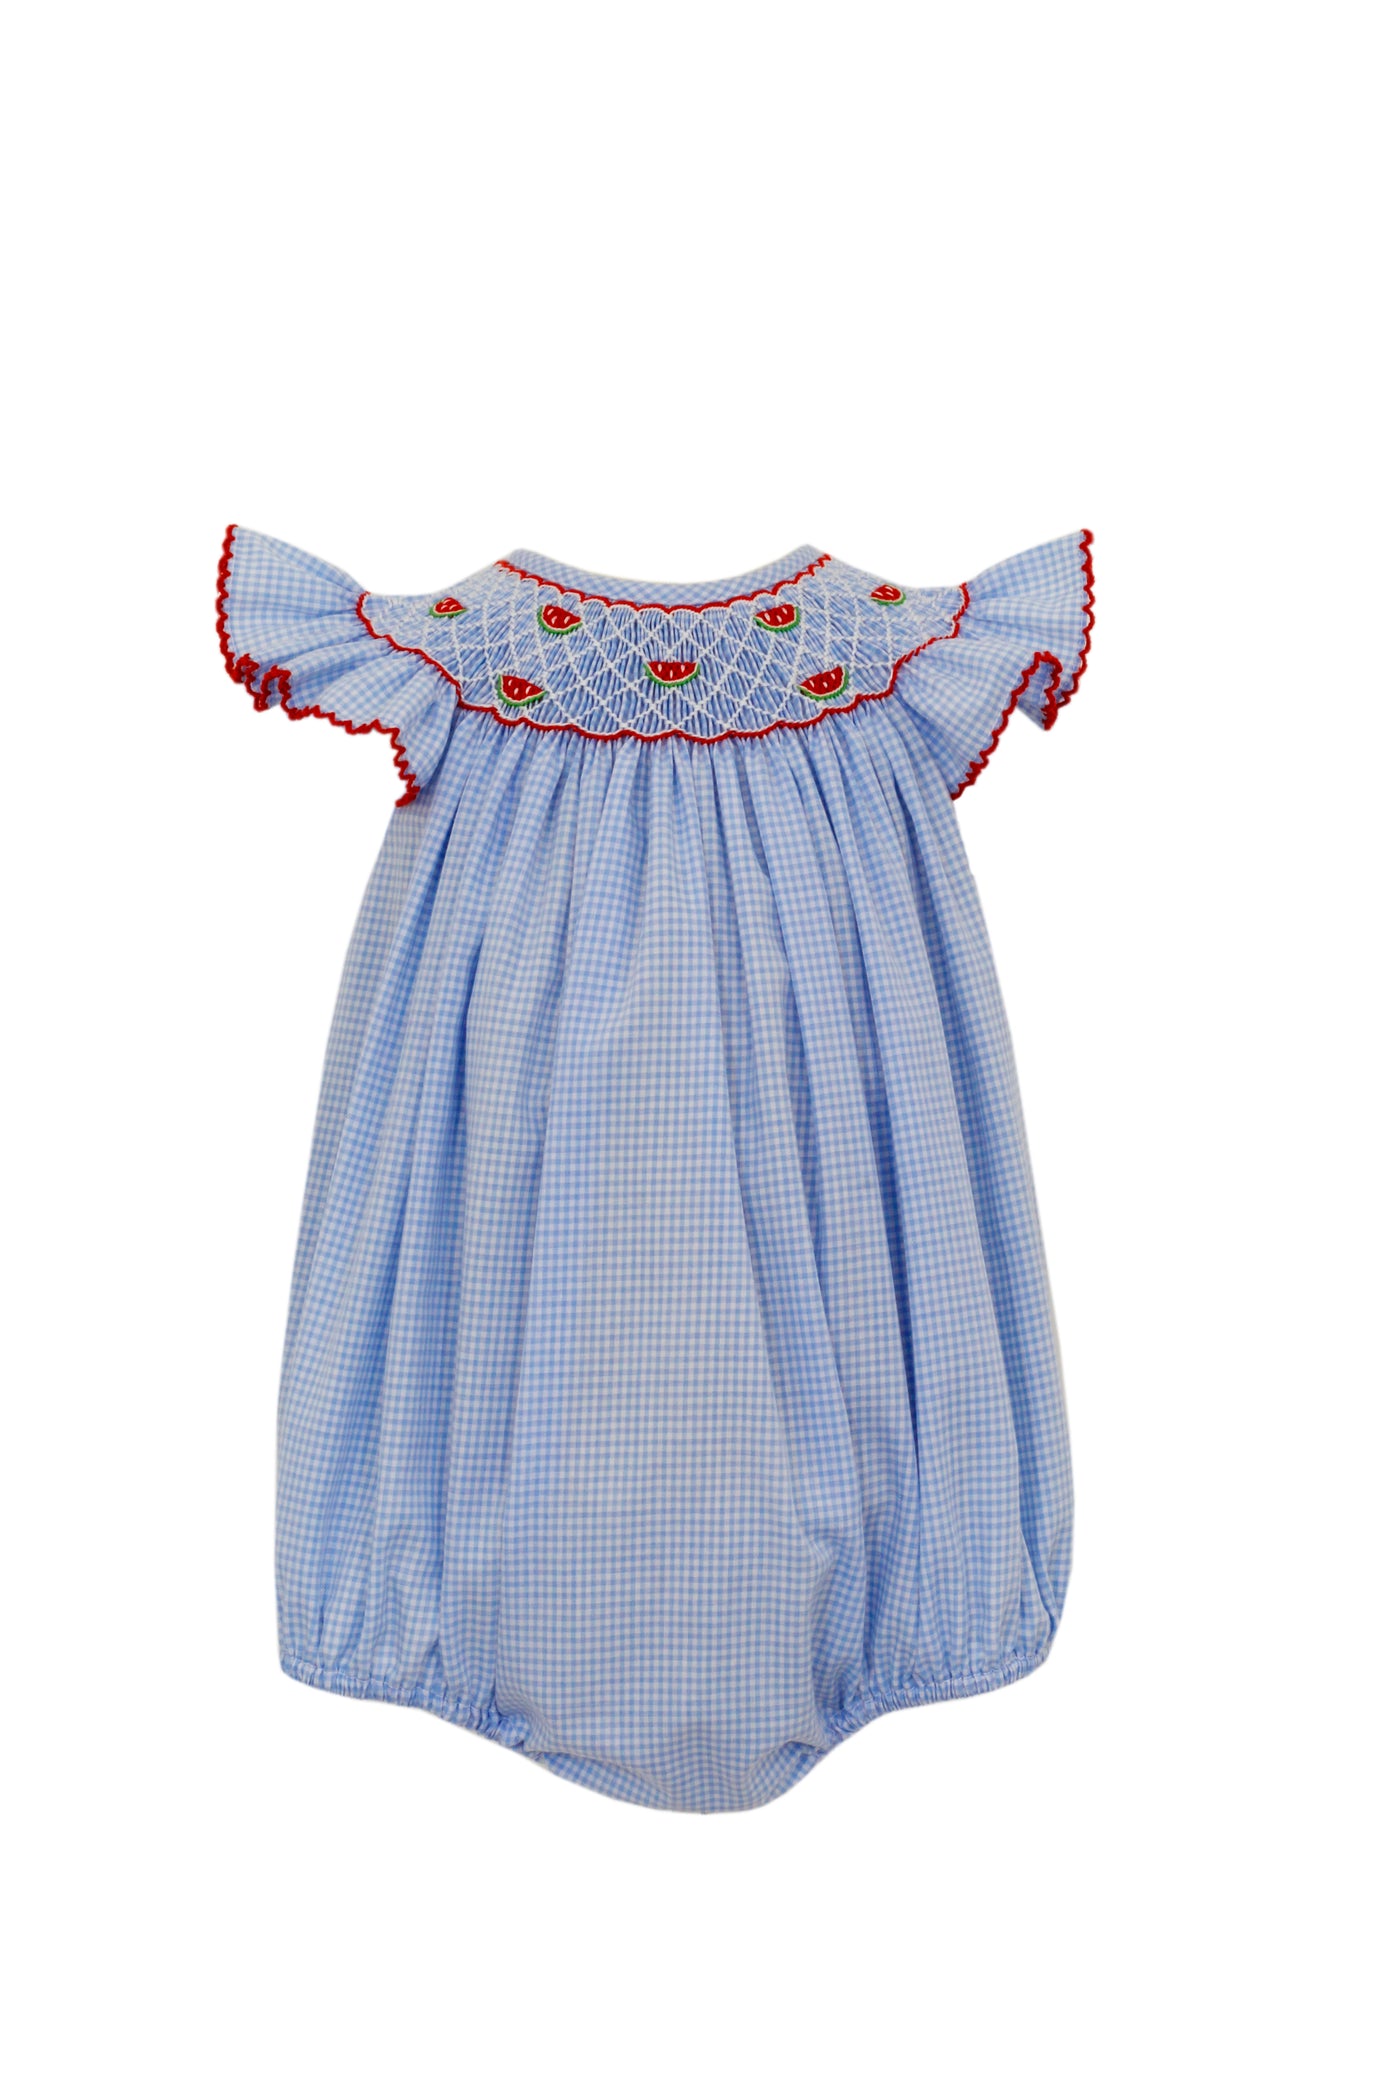 Watermelon Smocked Bishop Bubble - Blue Gingham